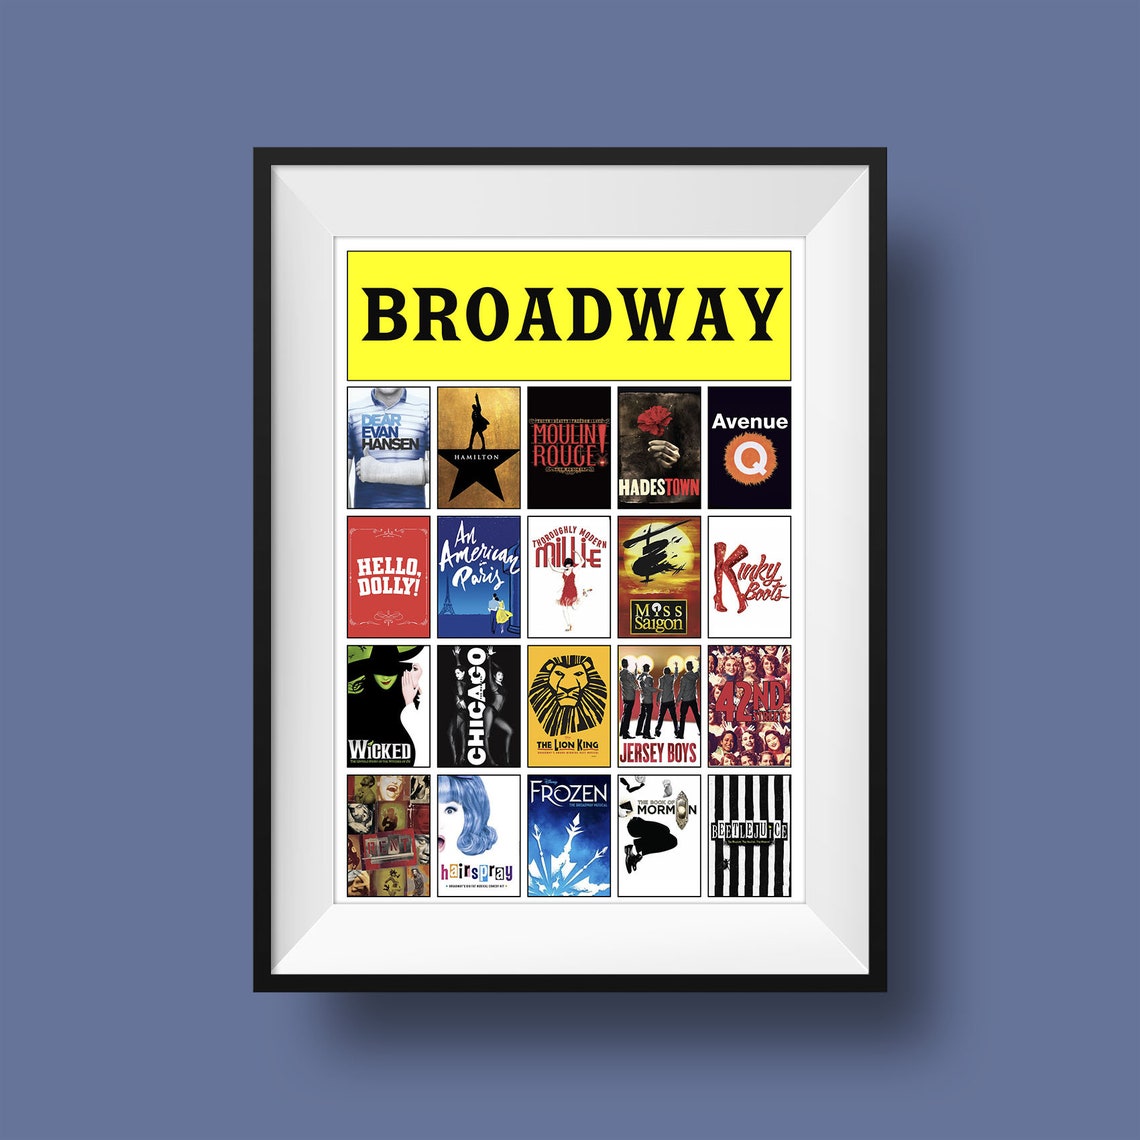 broadway shows apple mainstage packs